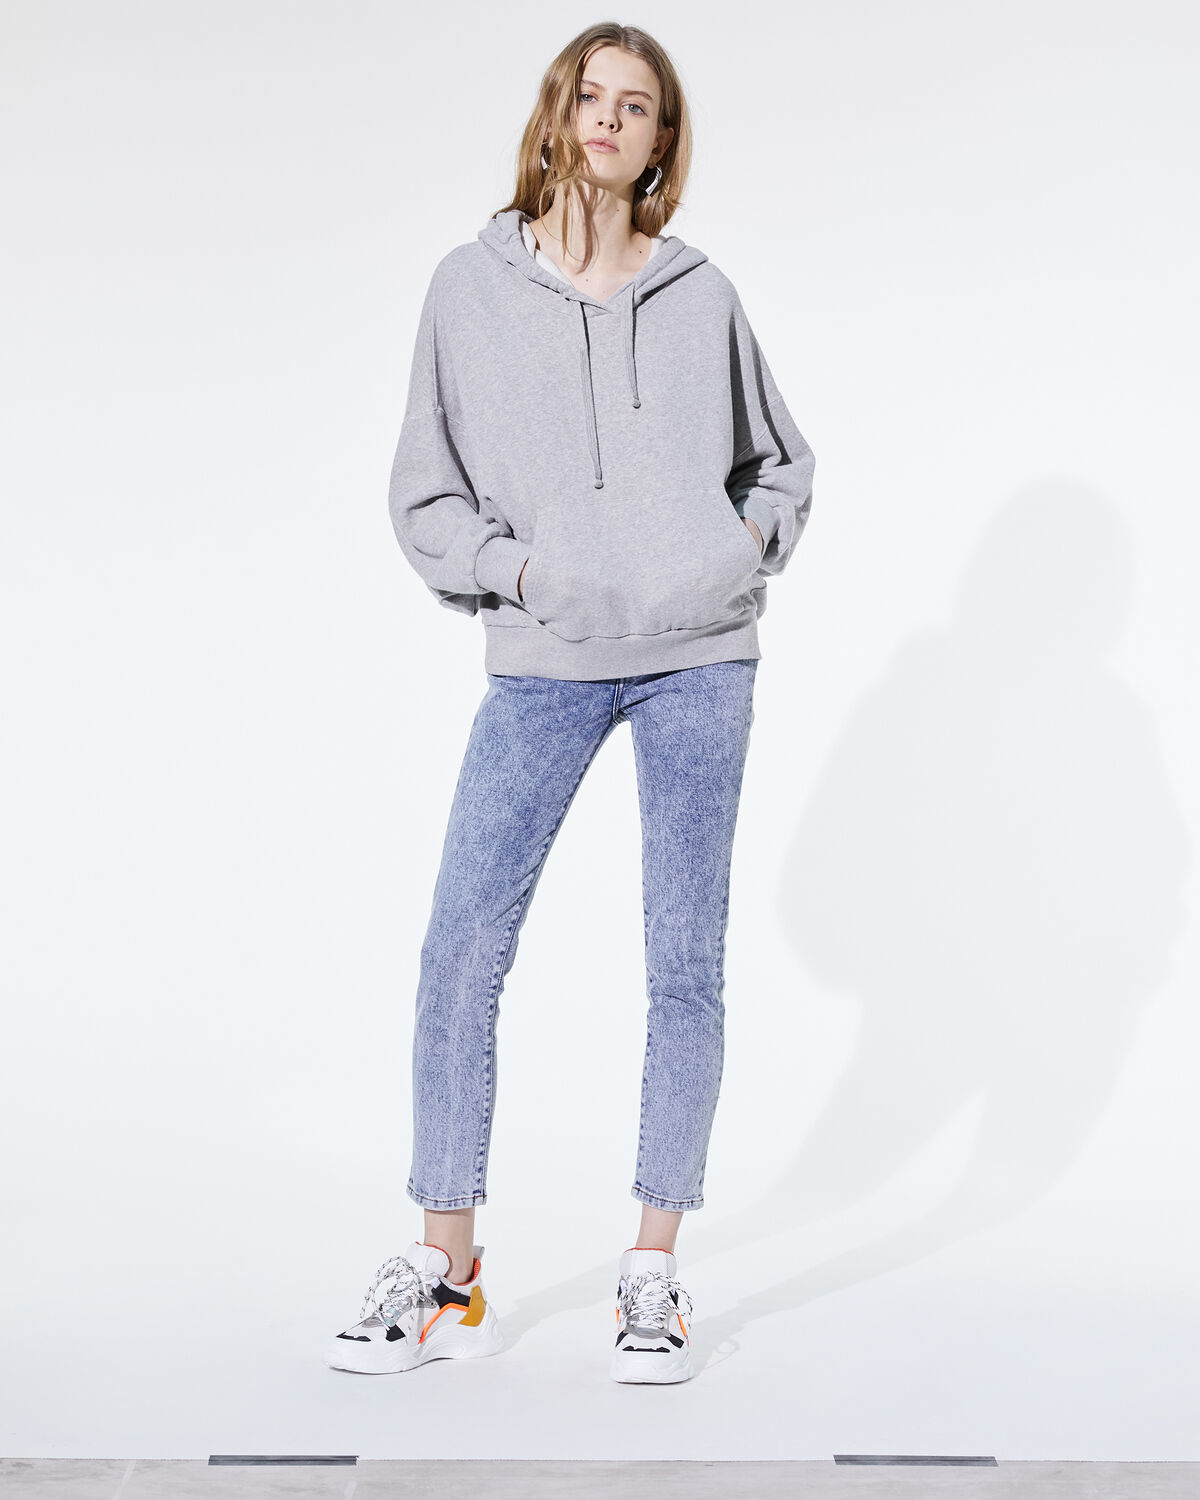 Photo of IRO Paris Biglake Sweatshirt Mixed Grey - In A Sportwear Style, This Hoodie Is Distinguished By Its Iro Silkscreen Printing On The Back And Loose Fit. Wear It With A Pair Of Vintage Sneakers For A Modern And Casual Look. Fall Winter 19